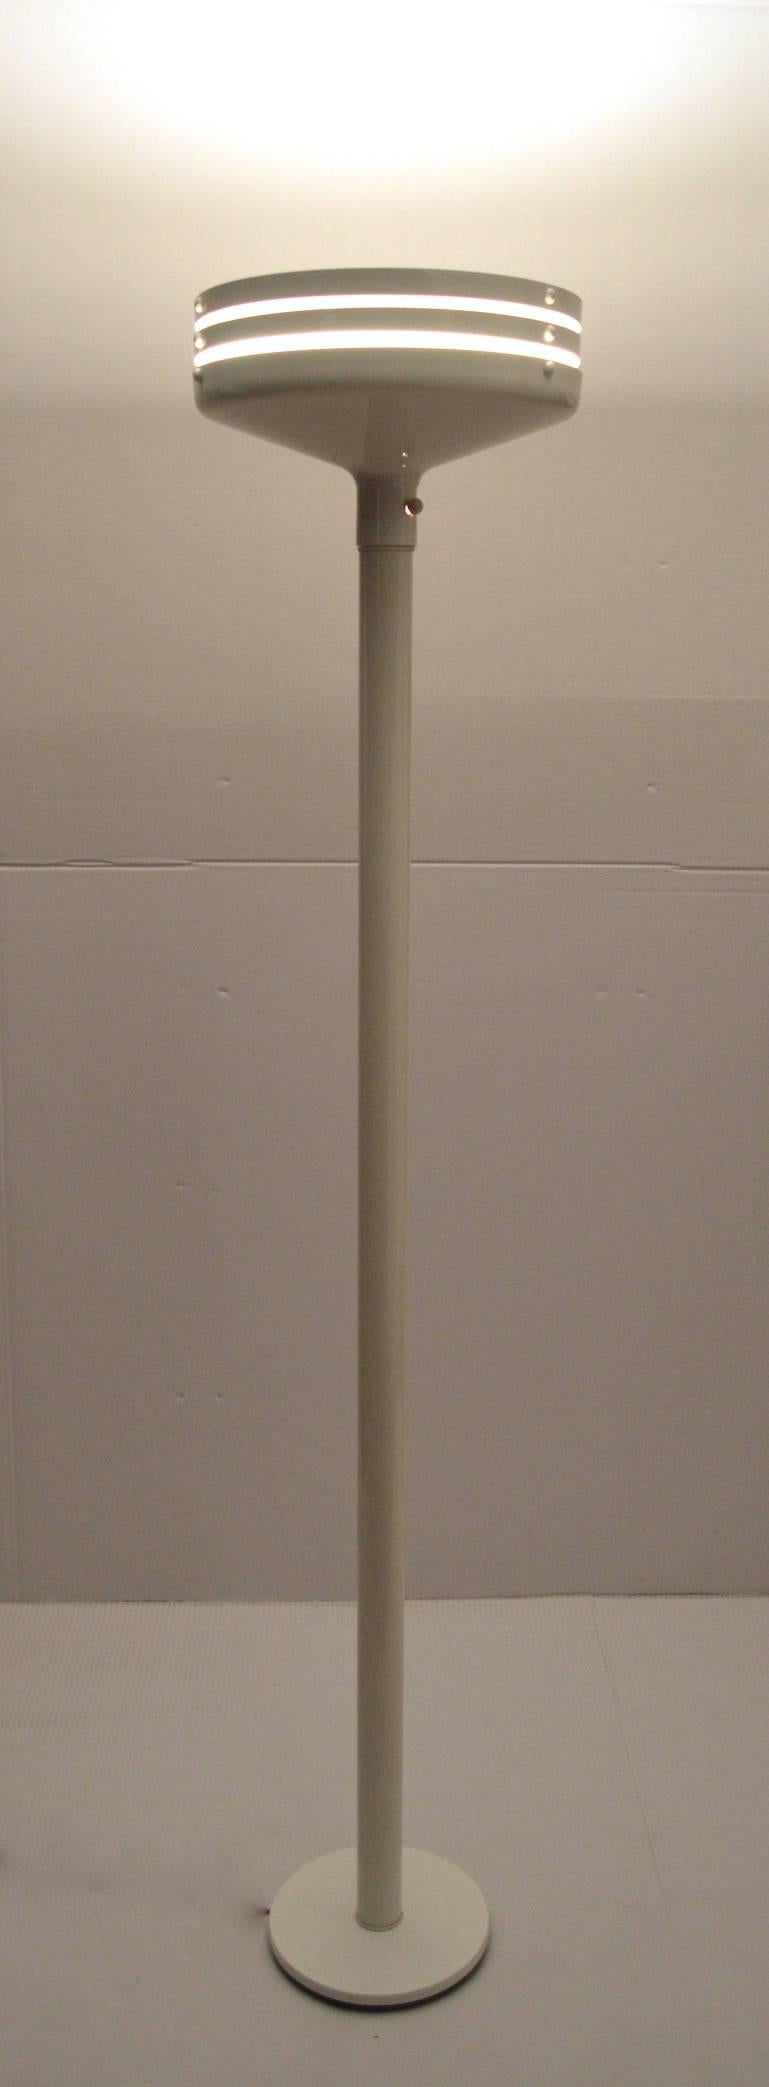 Mid-Century Modern Louvered White Enamel Torchiere Floor Lamp Attributed to Lightolier